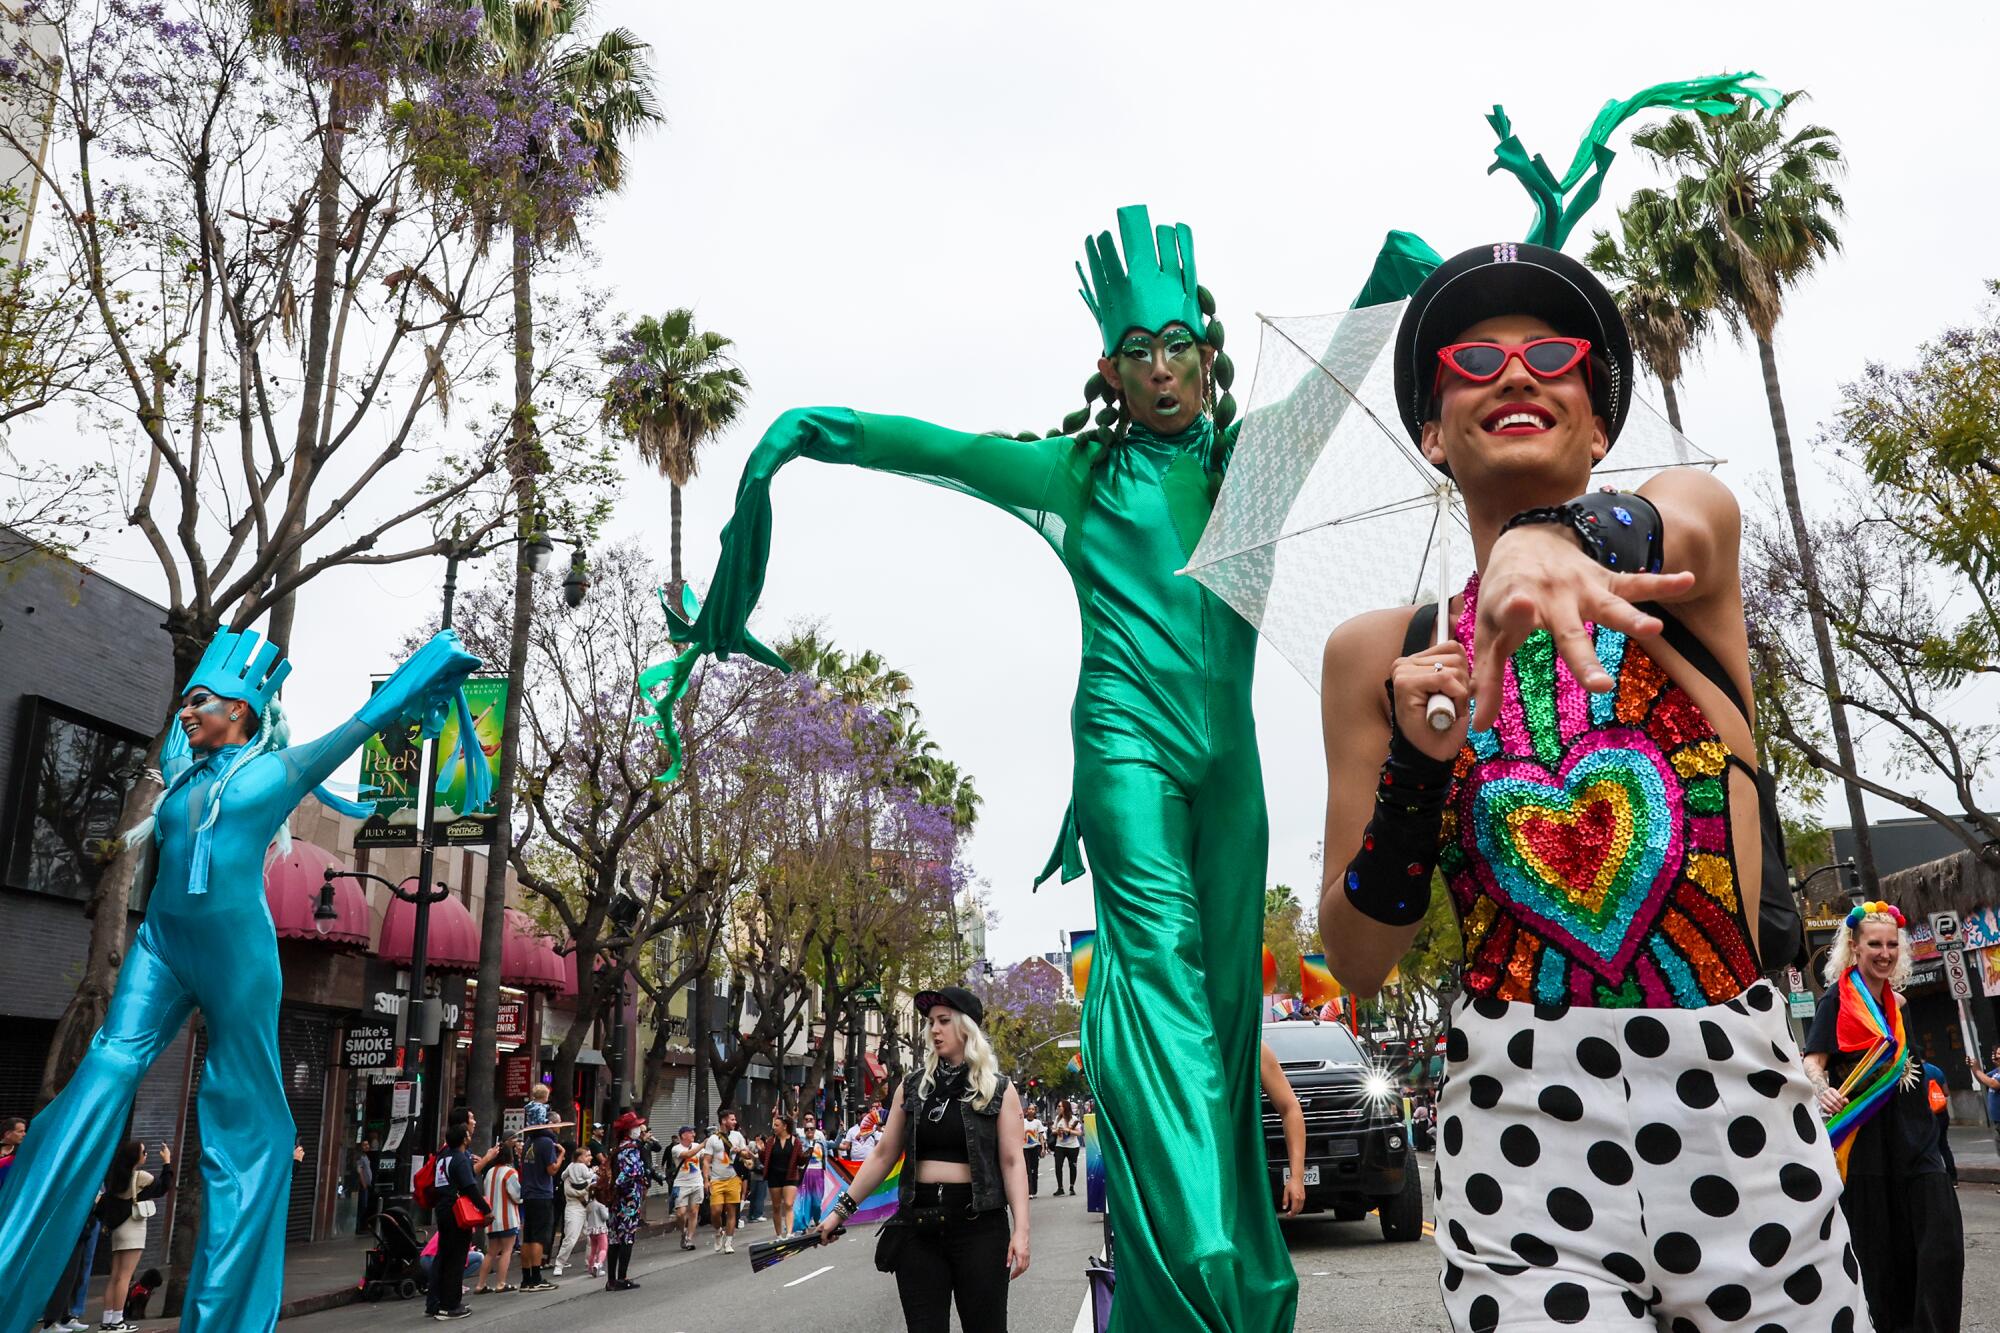 Tino Glamour leads a group of stilted dancers in brightly colored outfits in the 2024 LA Pride Parade.